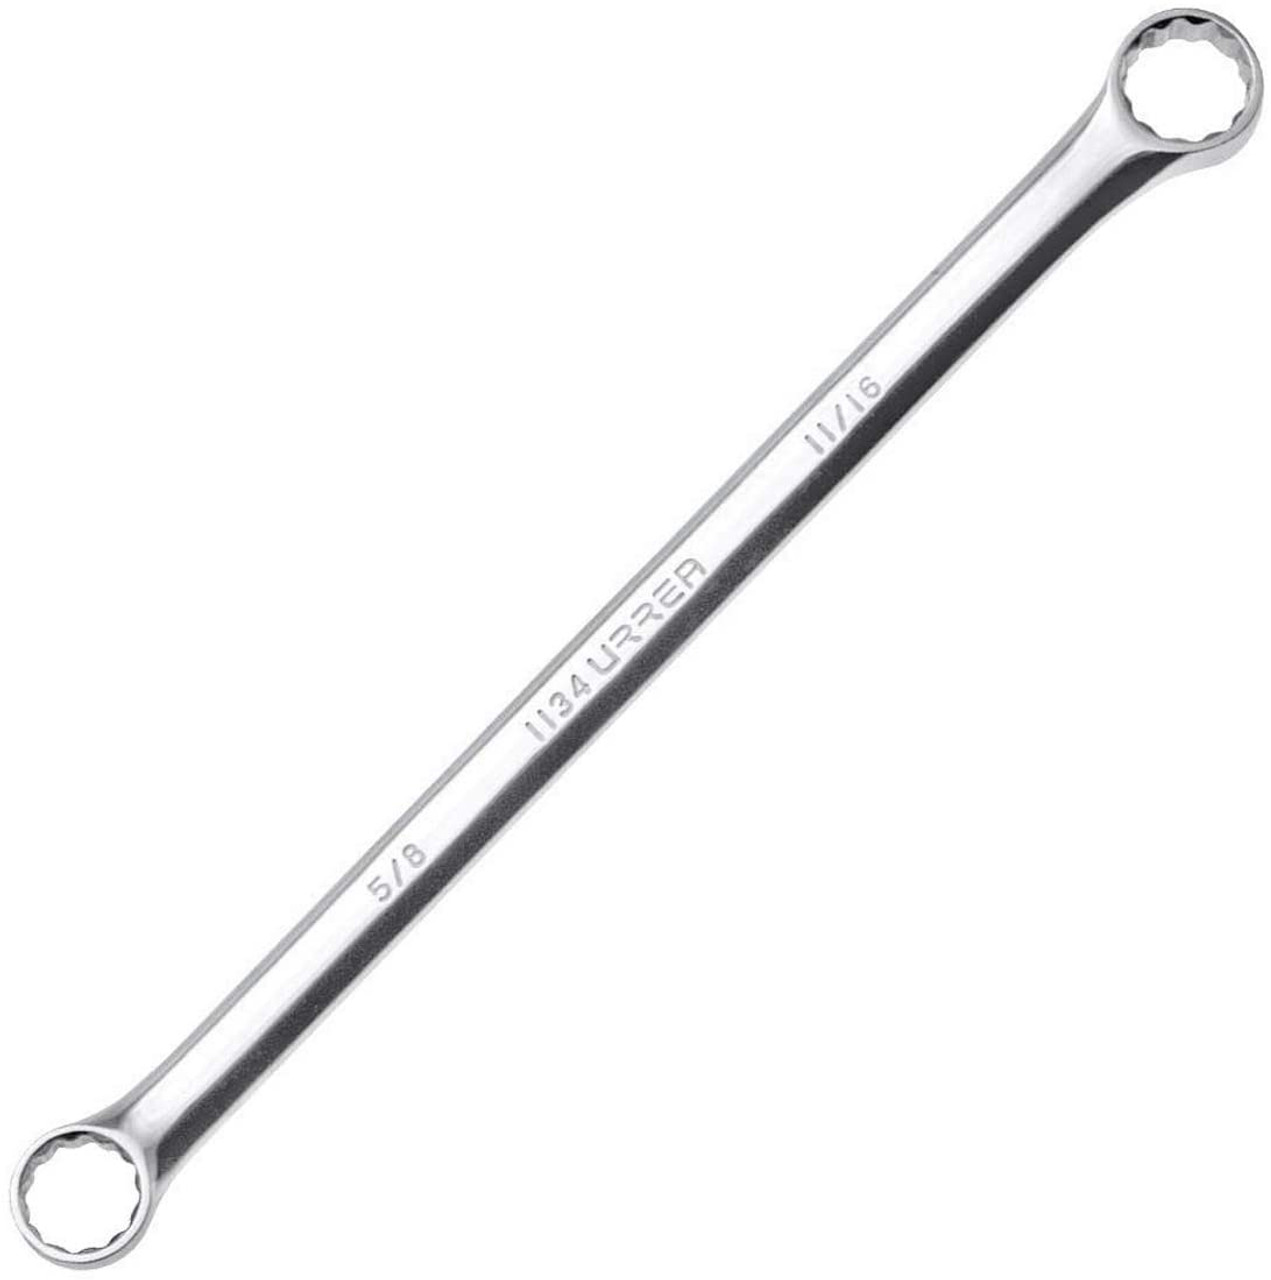 Full polished  15 Degree Box-End wrench, Size: 14 x15 mm,12 Point , Total Length: 5-3/4"